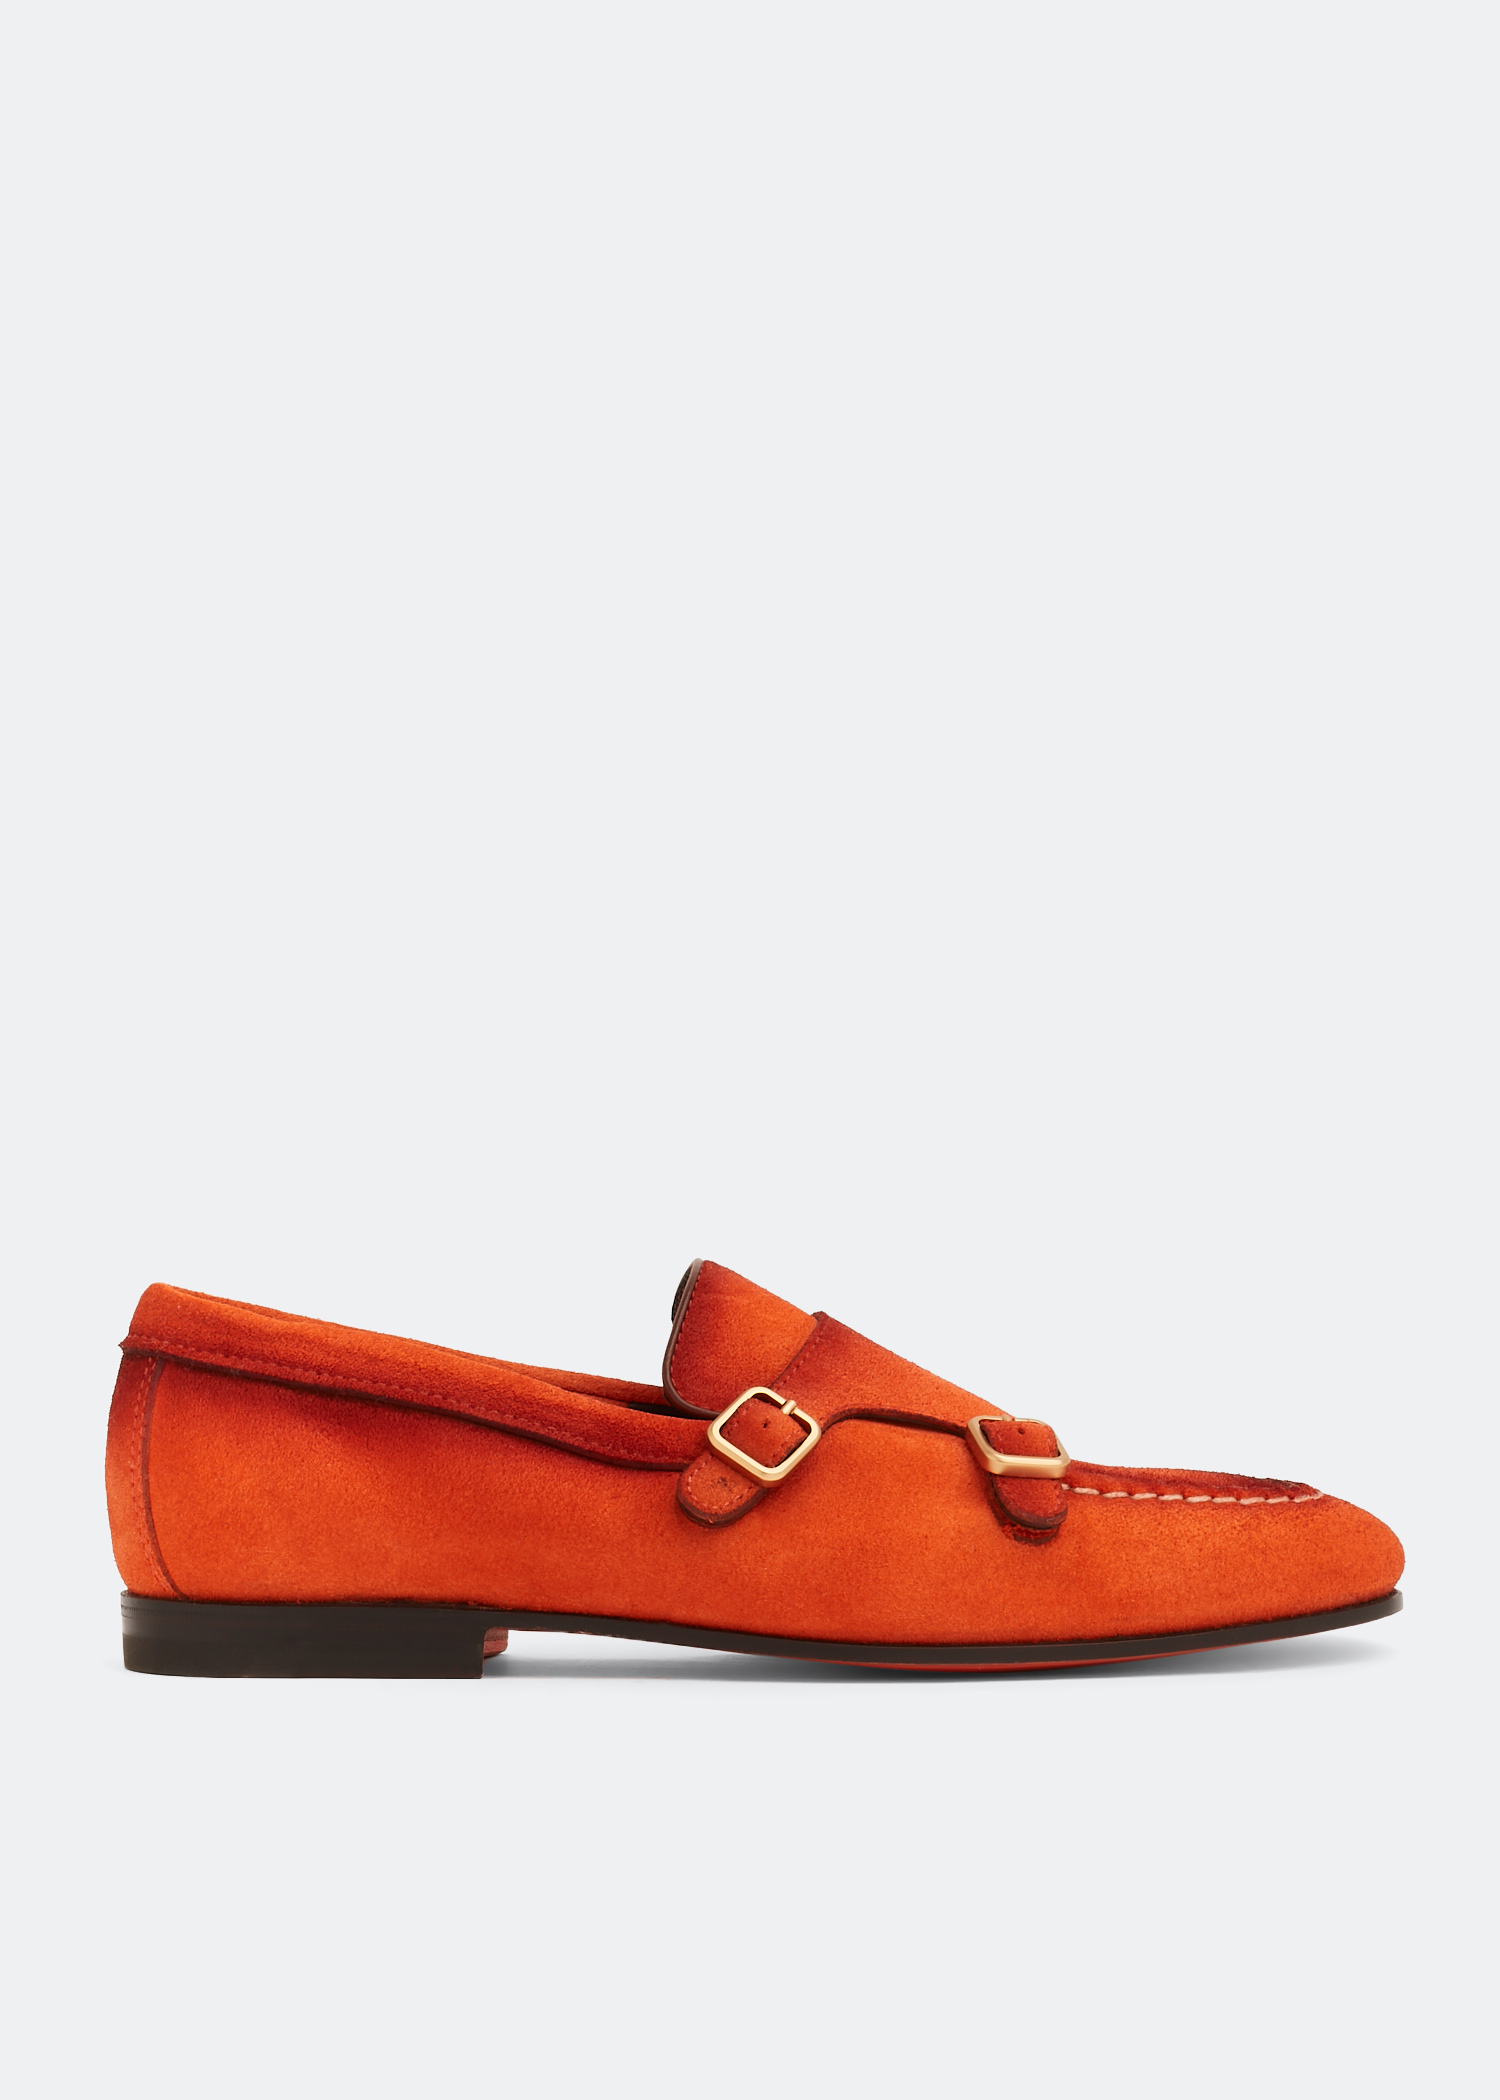 Dong monk strap loafers